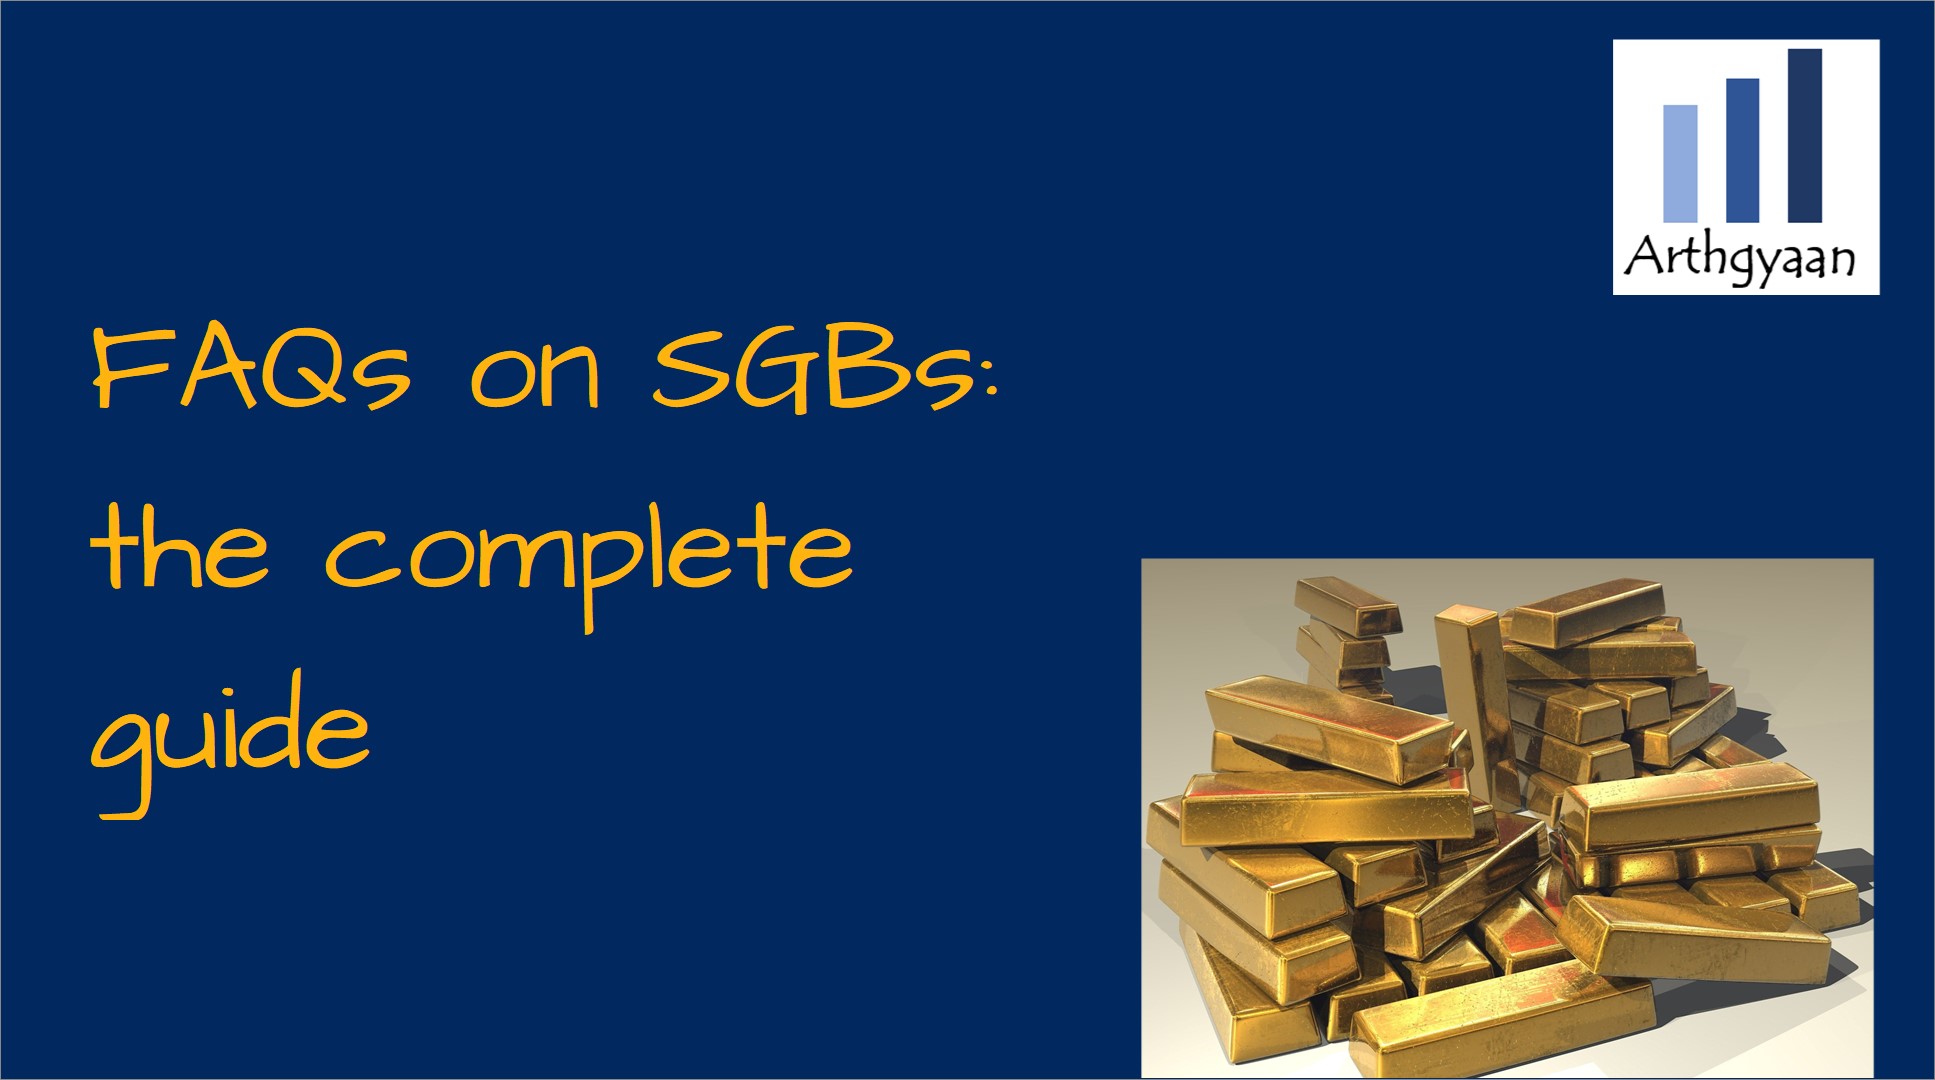 <p>This article compiles an exhaustive list of FAQs for Sovereign Gold Bonds (SGB).</p>

